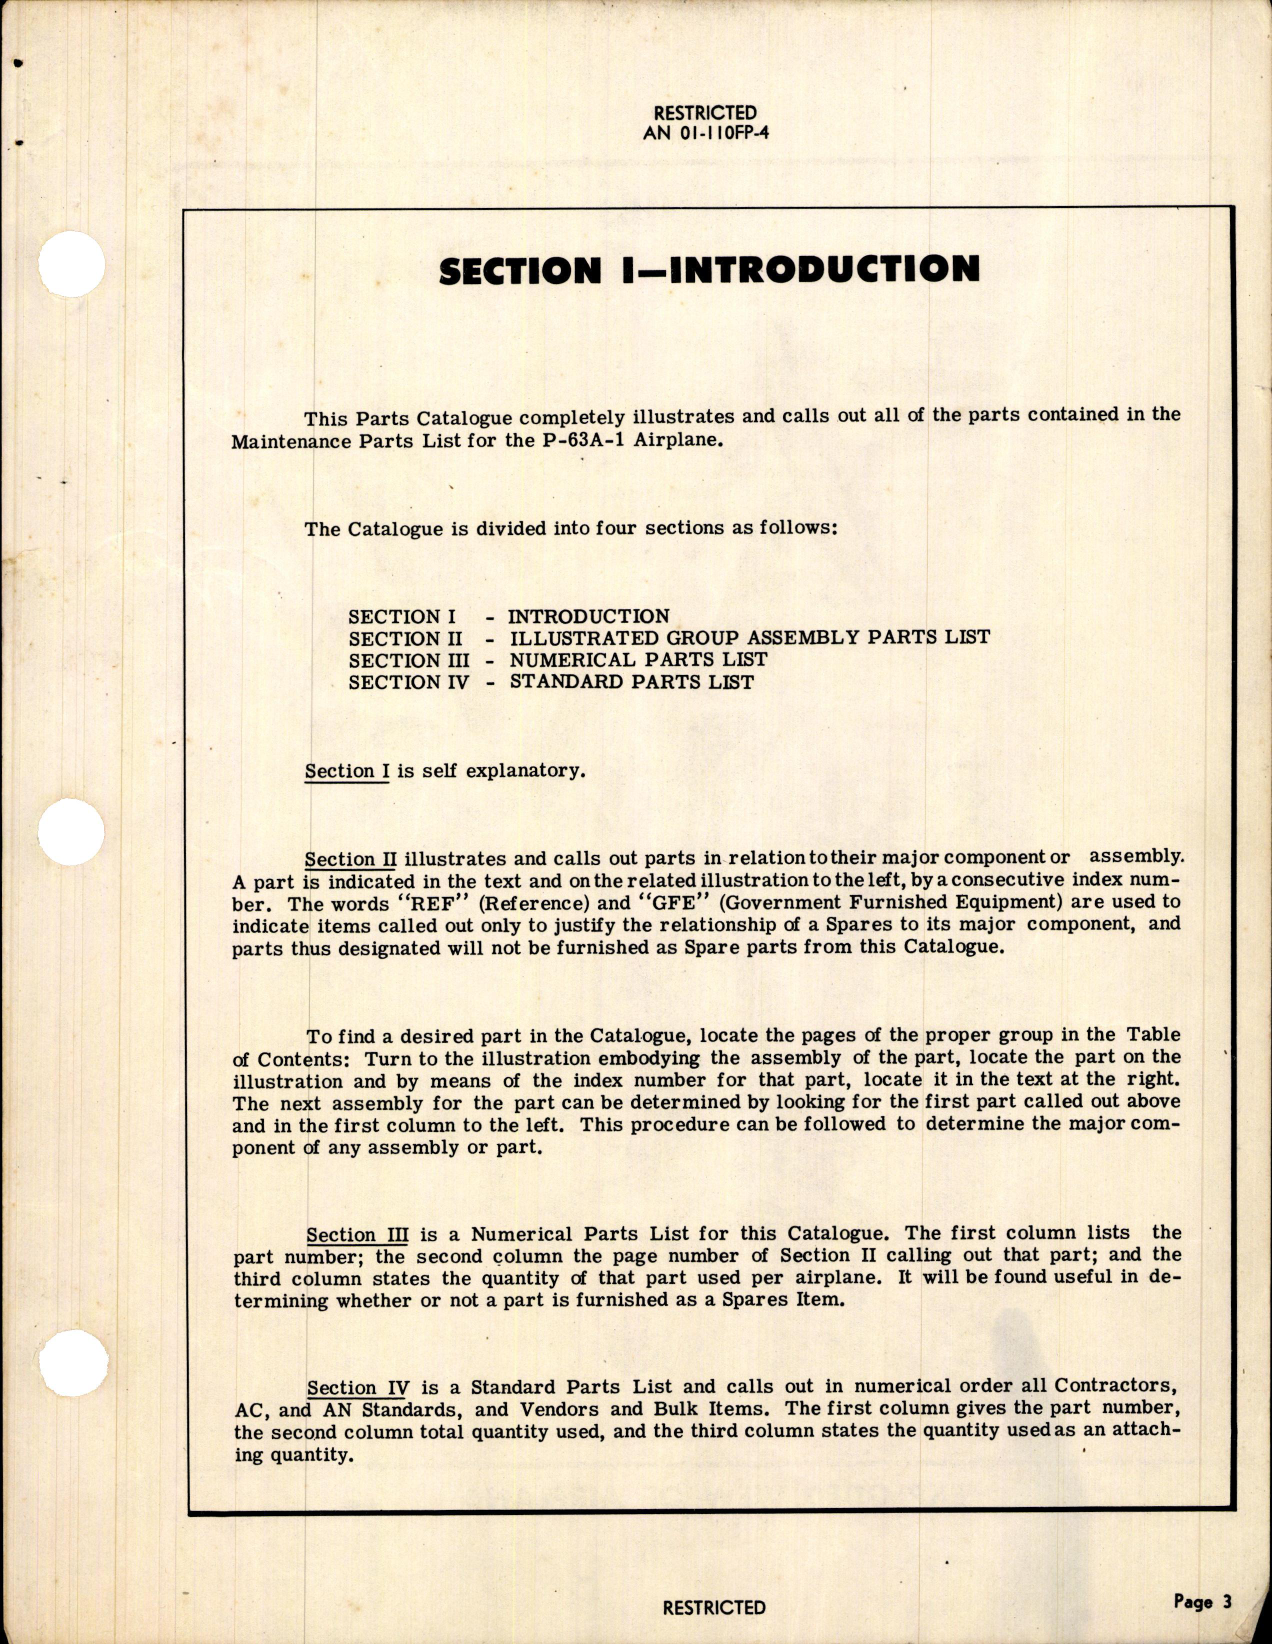 Sample page 5 from AirCorps Library document: Parts Catalog for the P-63A-1 